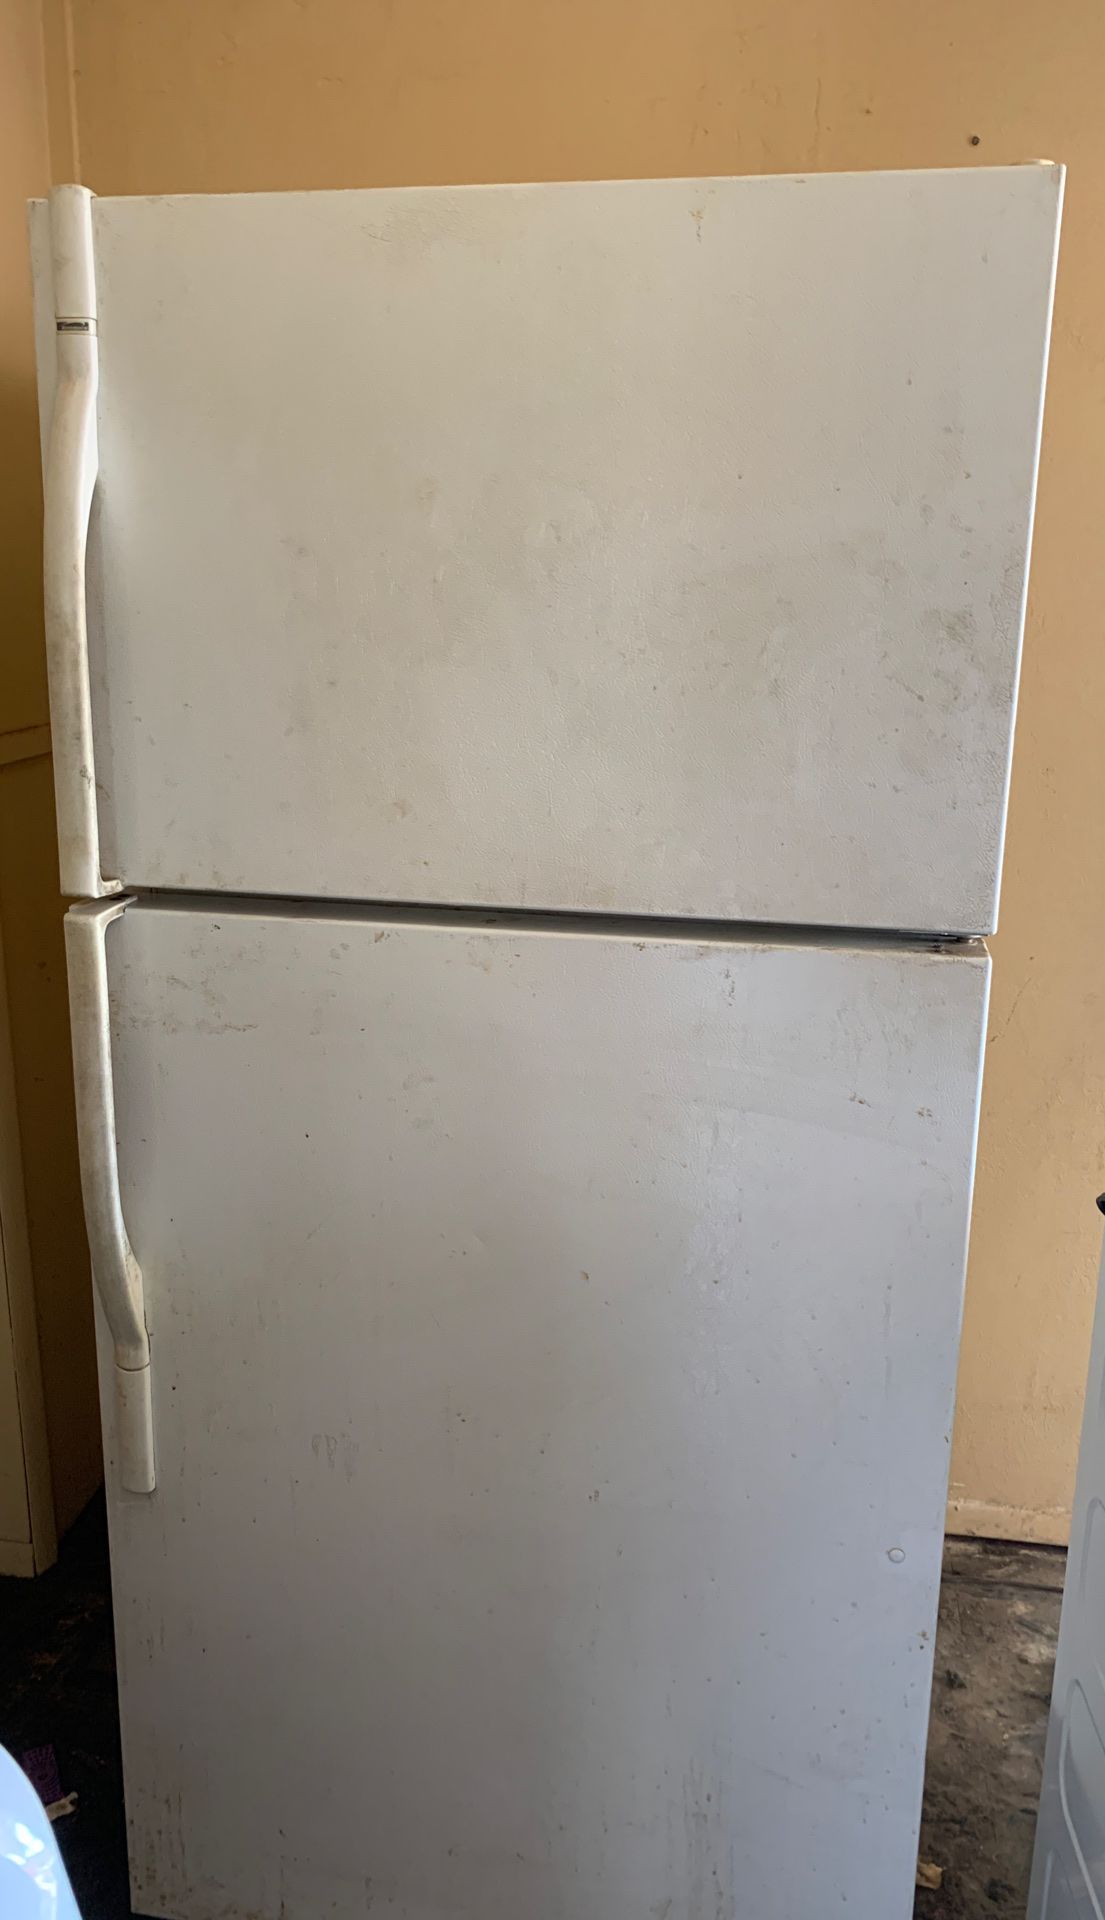 Pending pick up, Free refrigerator freezer needs cleaned but works great